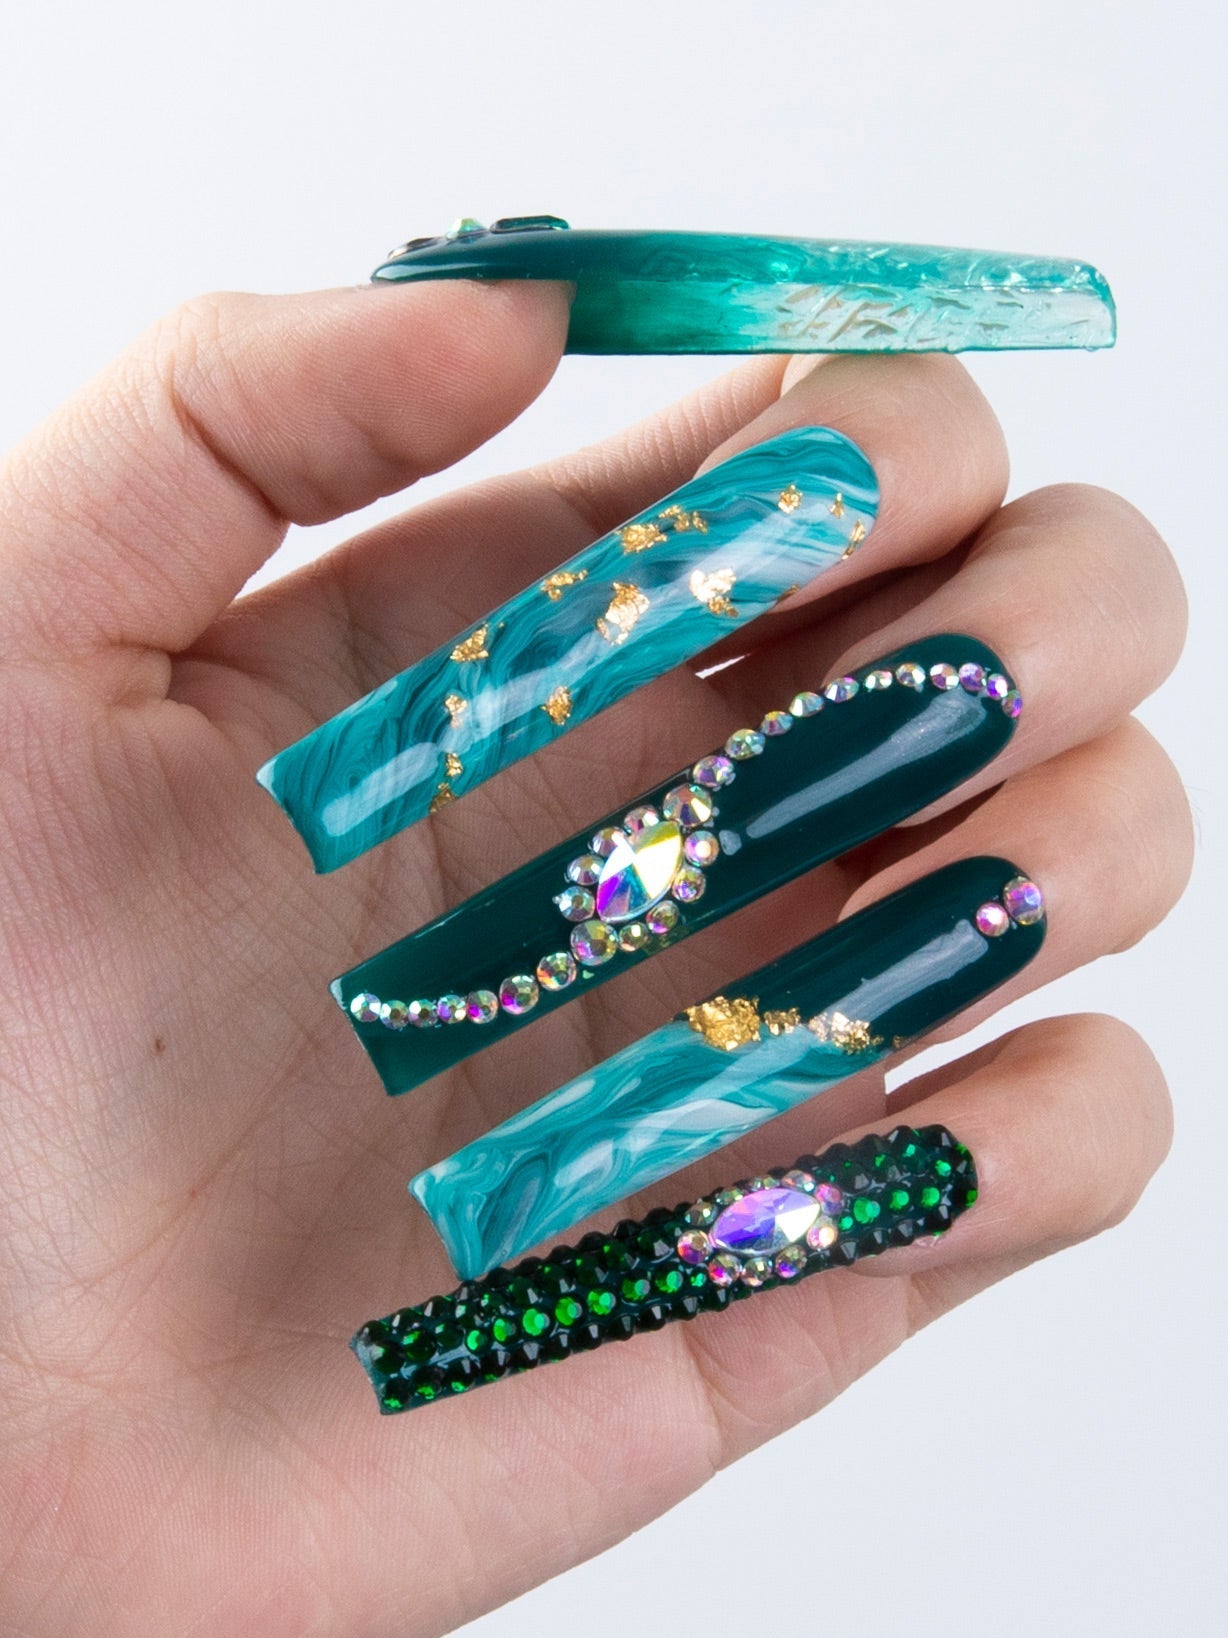 Hand with Emerald Envy press-on nails in square shape, adorned with gold decor, liquid flowing design, rhinestones, and iridescent embellishments, capturing nature's splendor for Lovful.com product page.